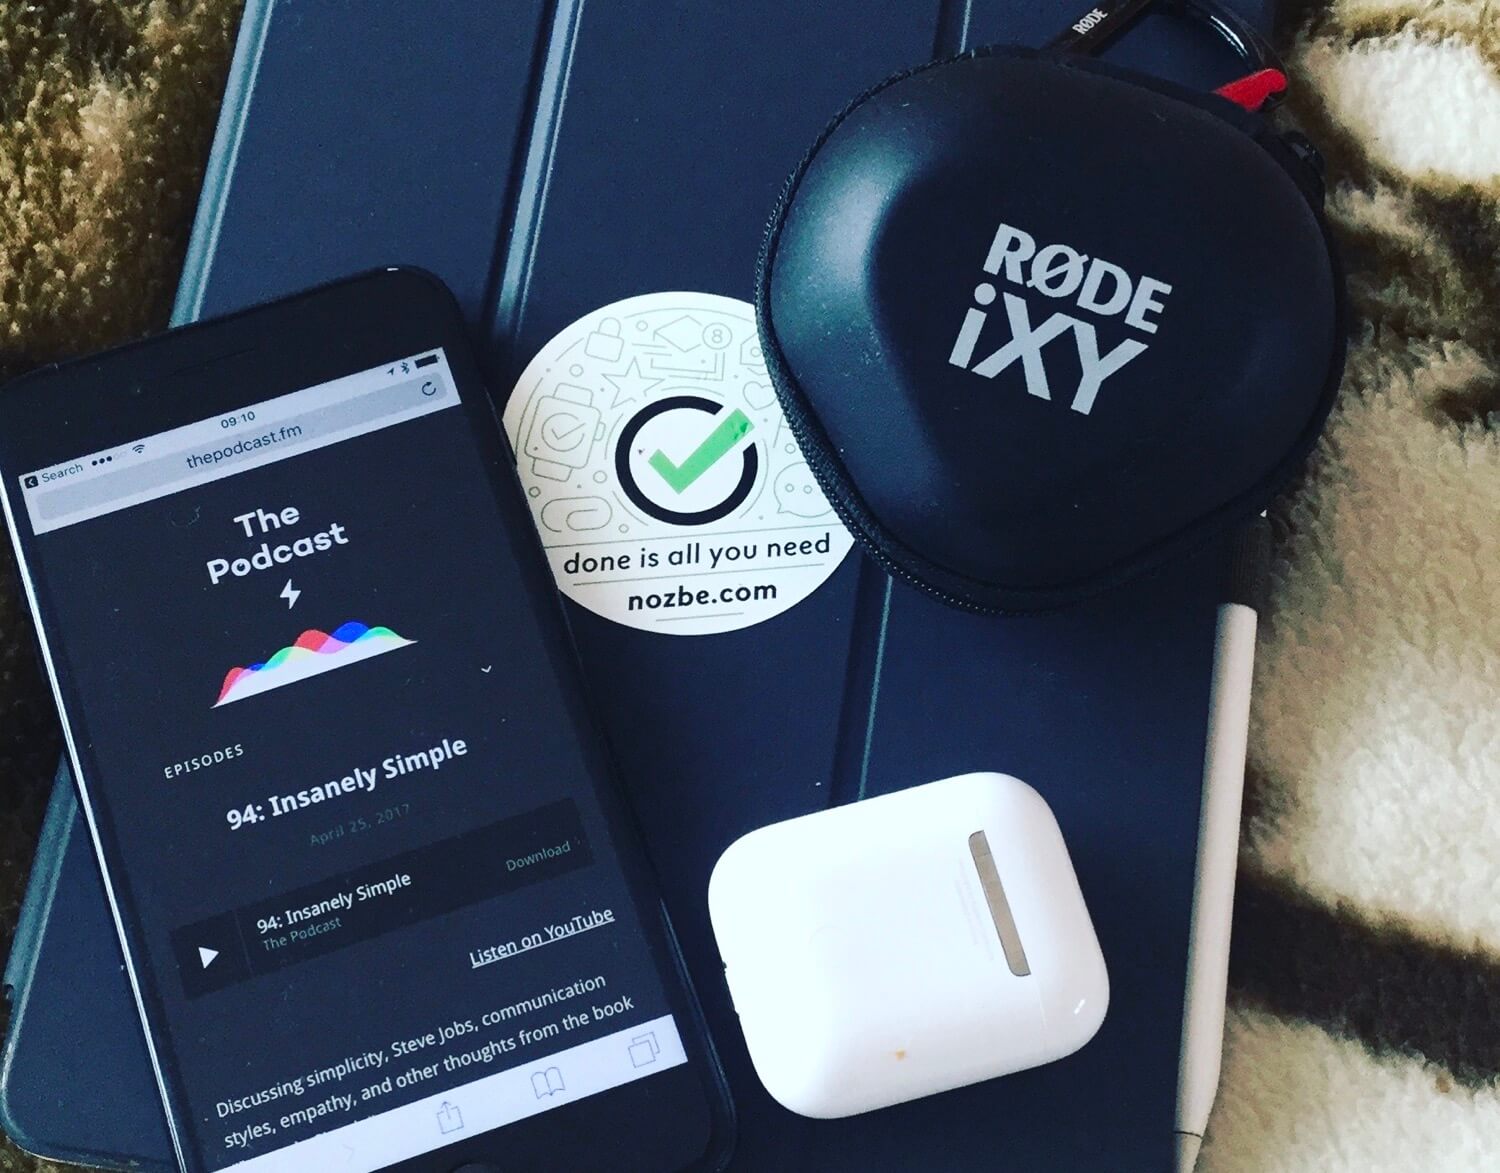 iPadOnly podcast recording set – how to travel & record podcasts with great quality and minimum equipment